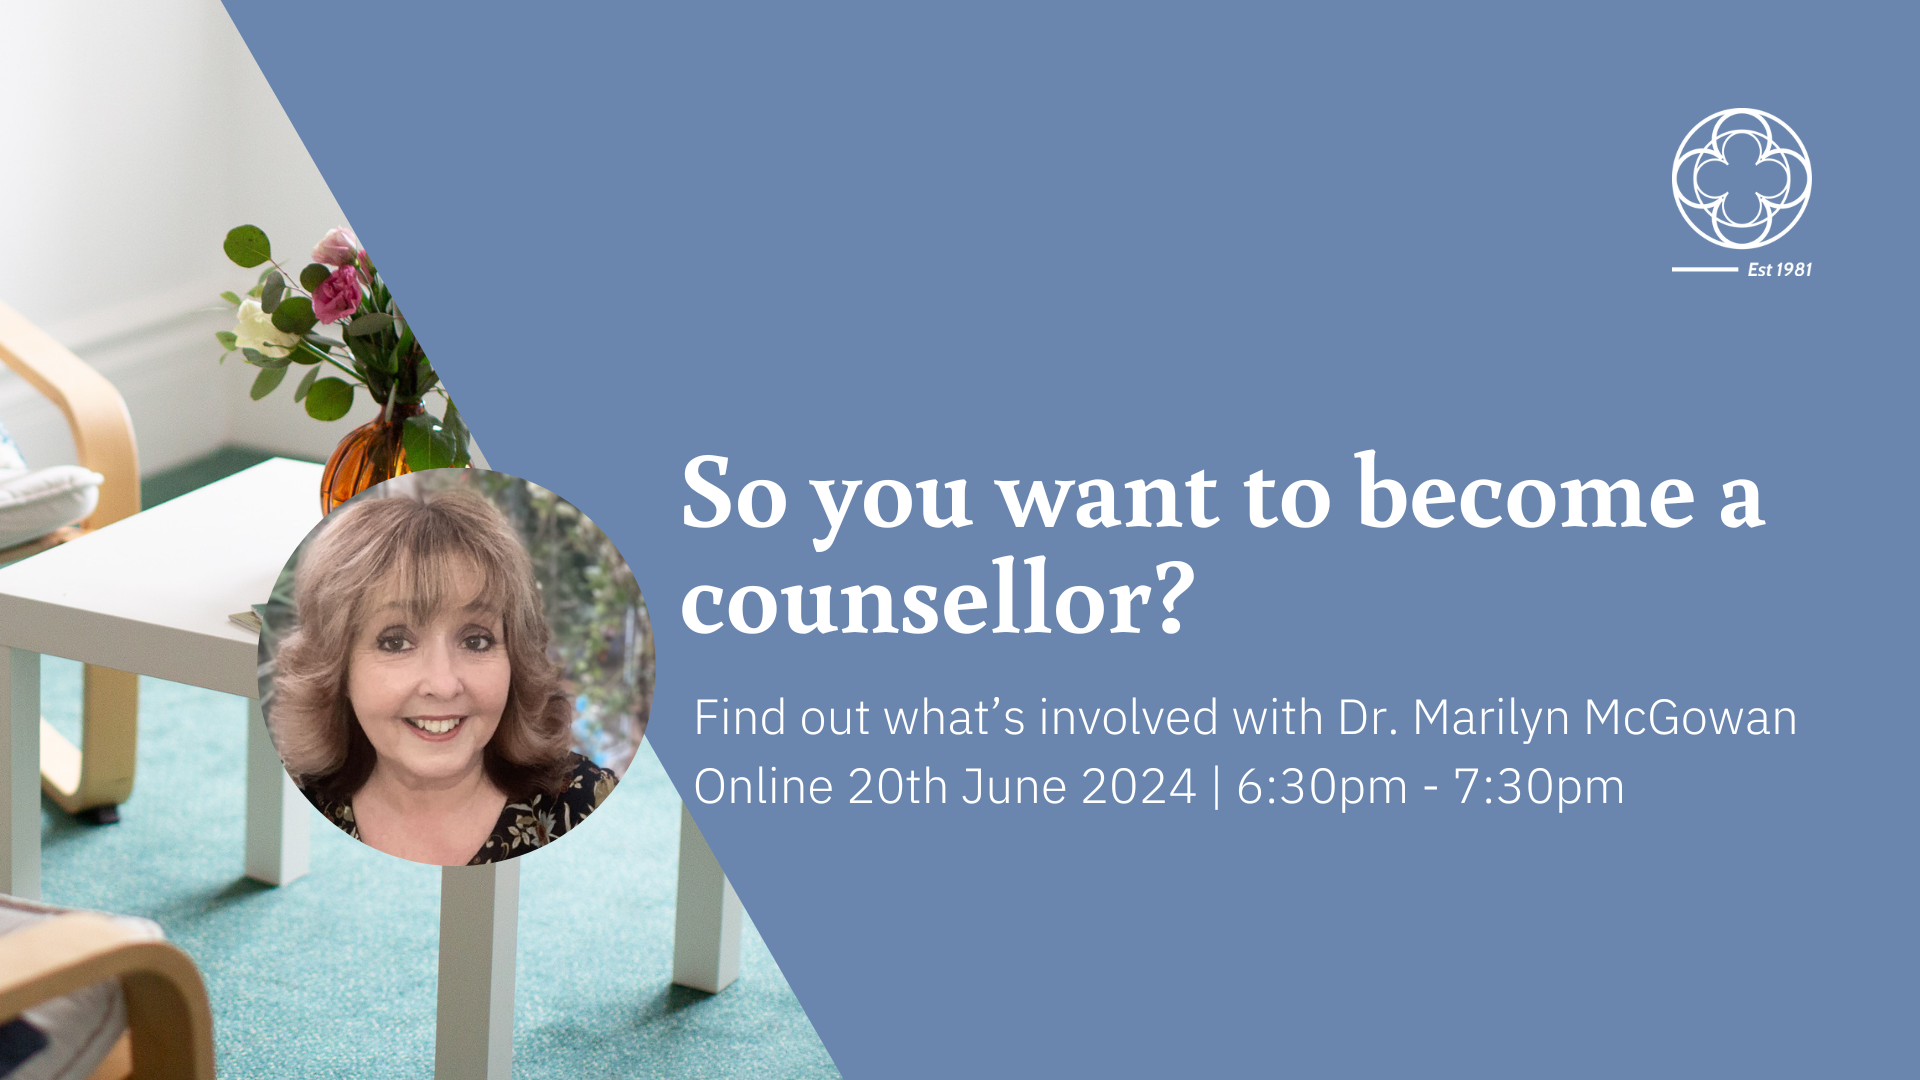 So you want to become a counsellor Image